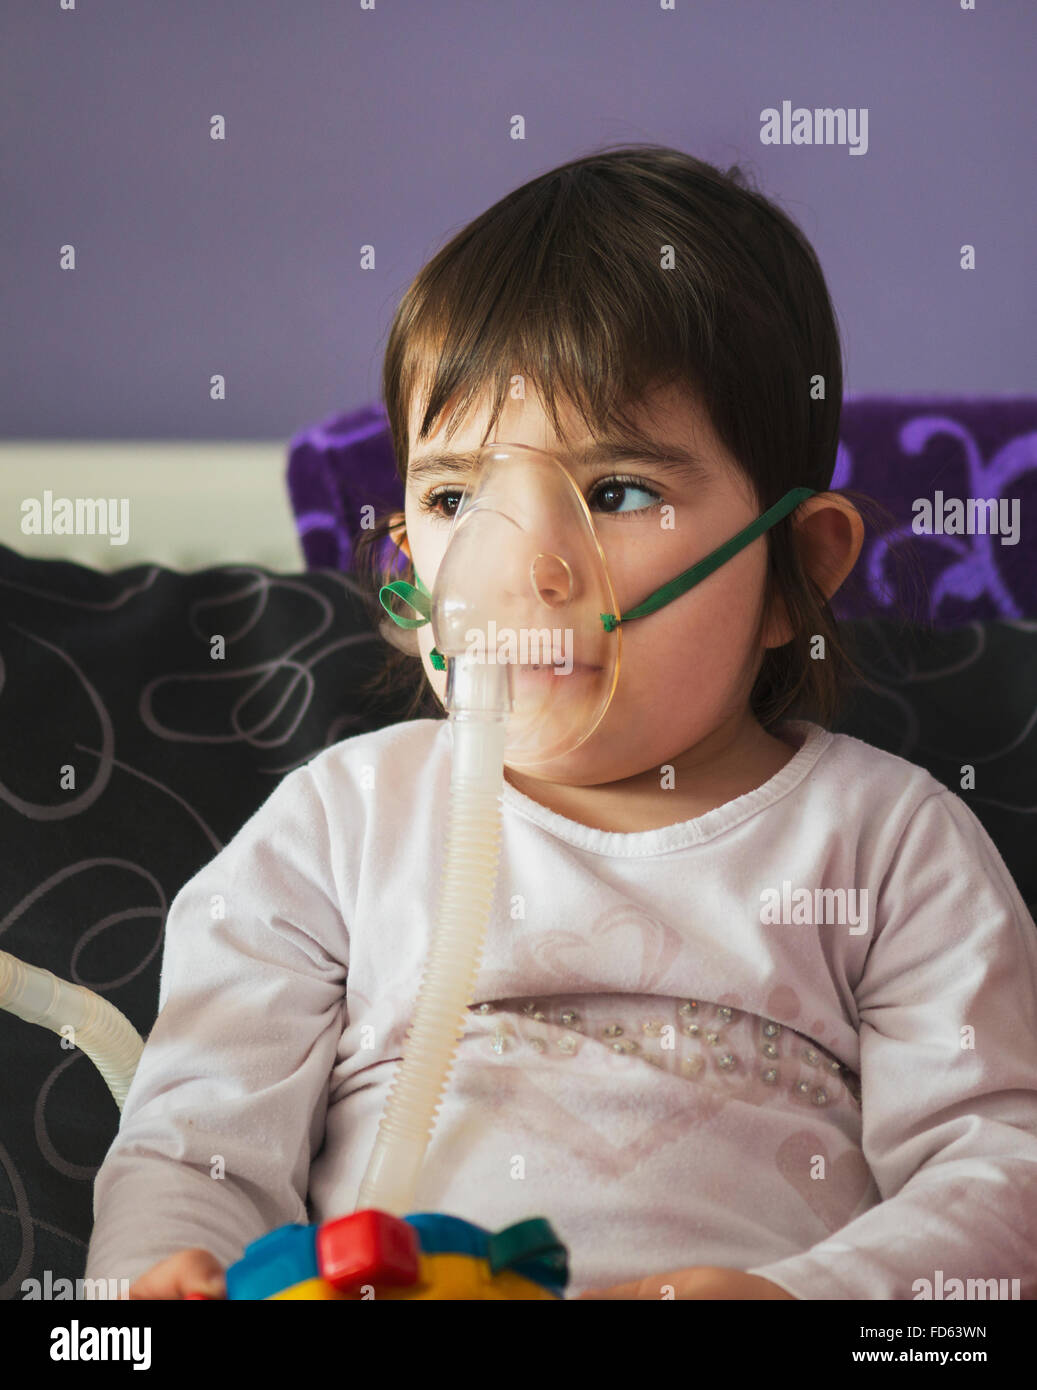 girl making inhalation with mask on her face Stock Photo